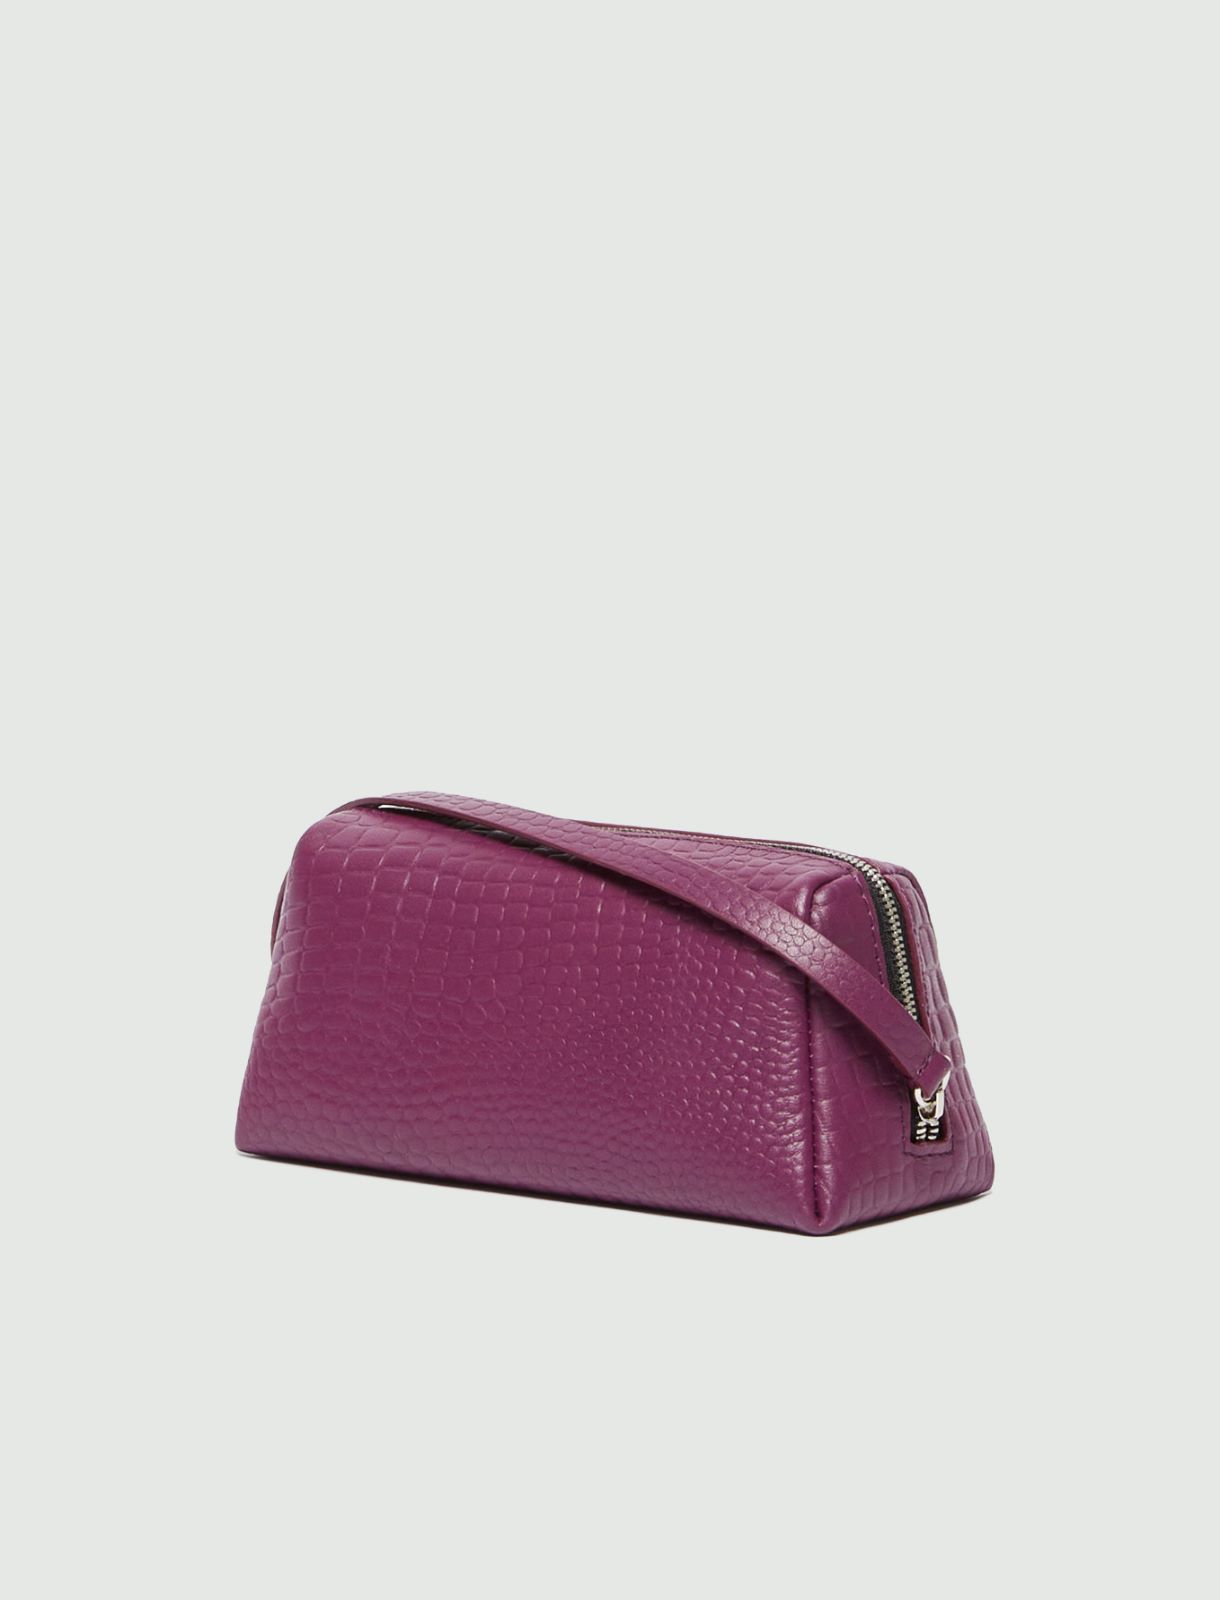 Leather toiletry bag - Must - Marella - 2